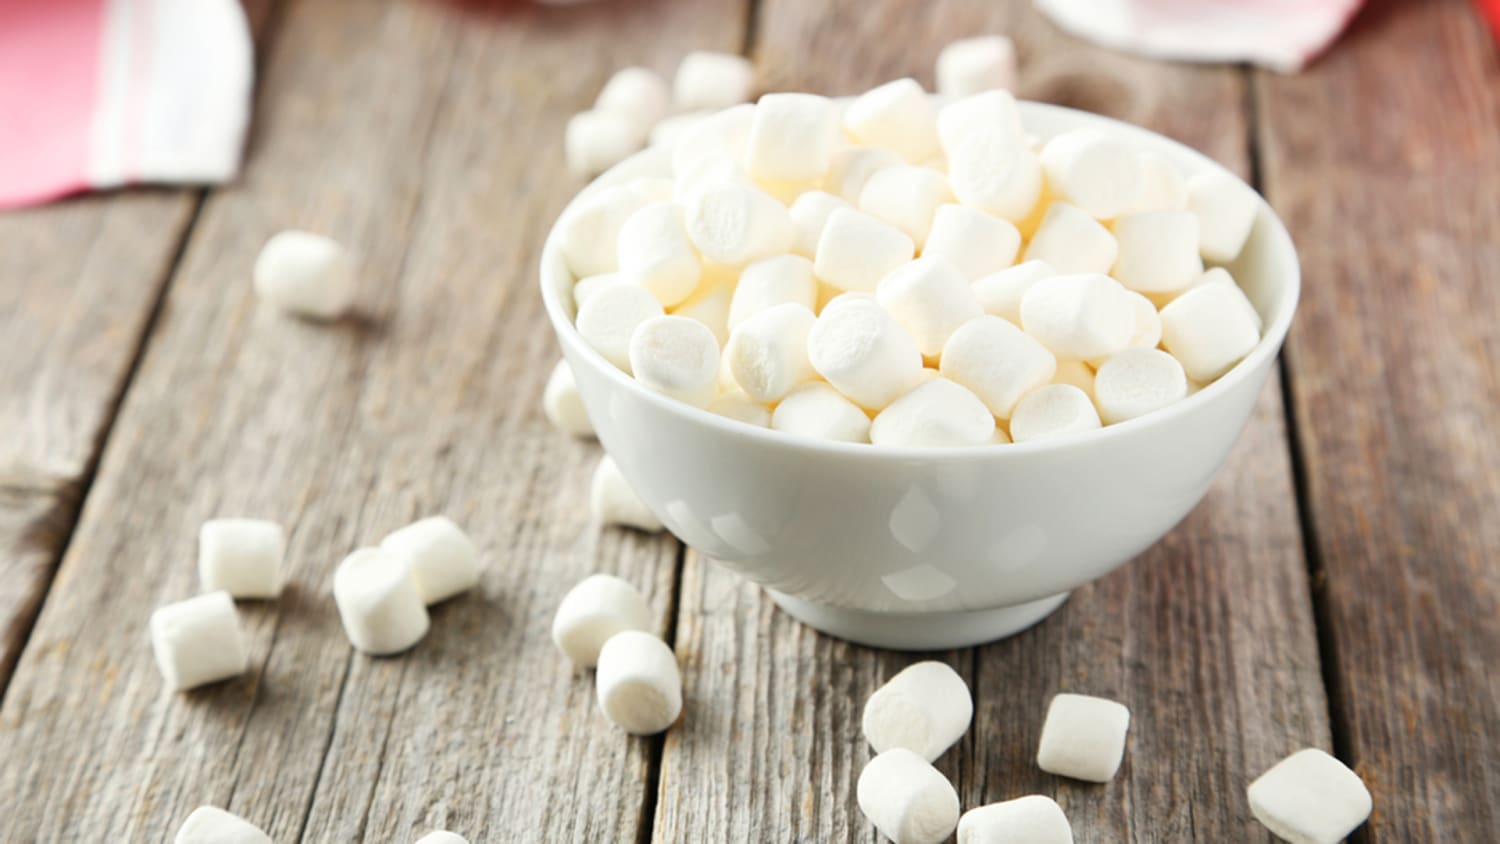 Don’t eat the marshmallow! 5 secrets to mastering willpower - TODAY.com